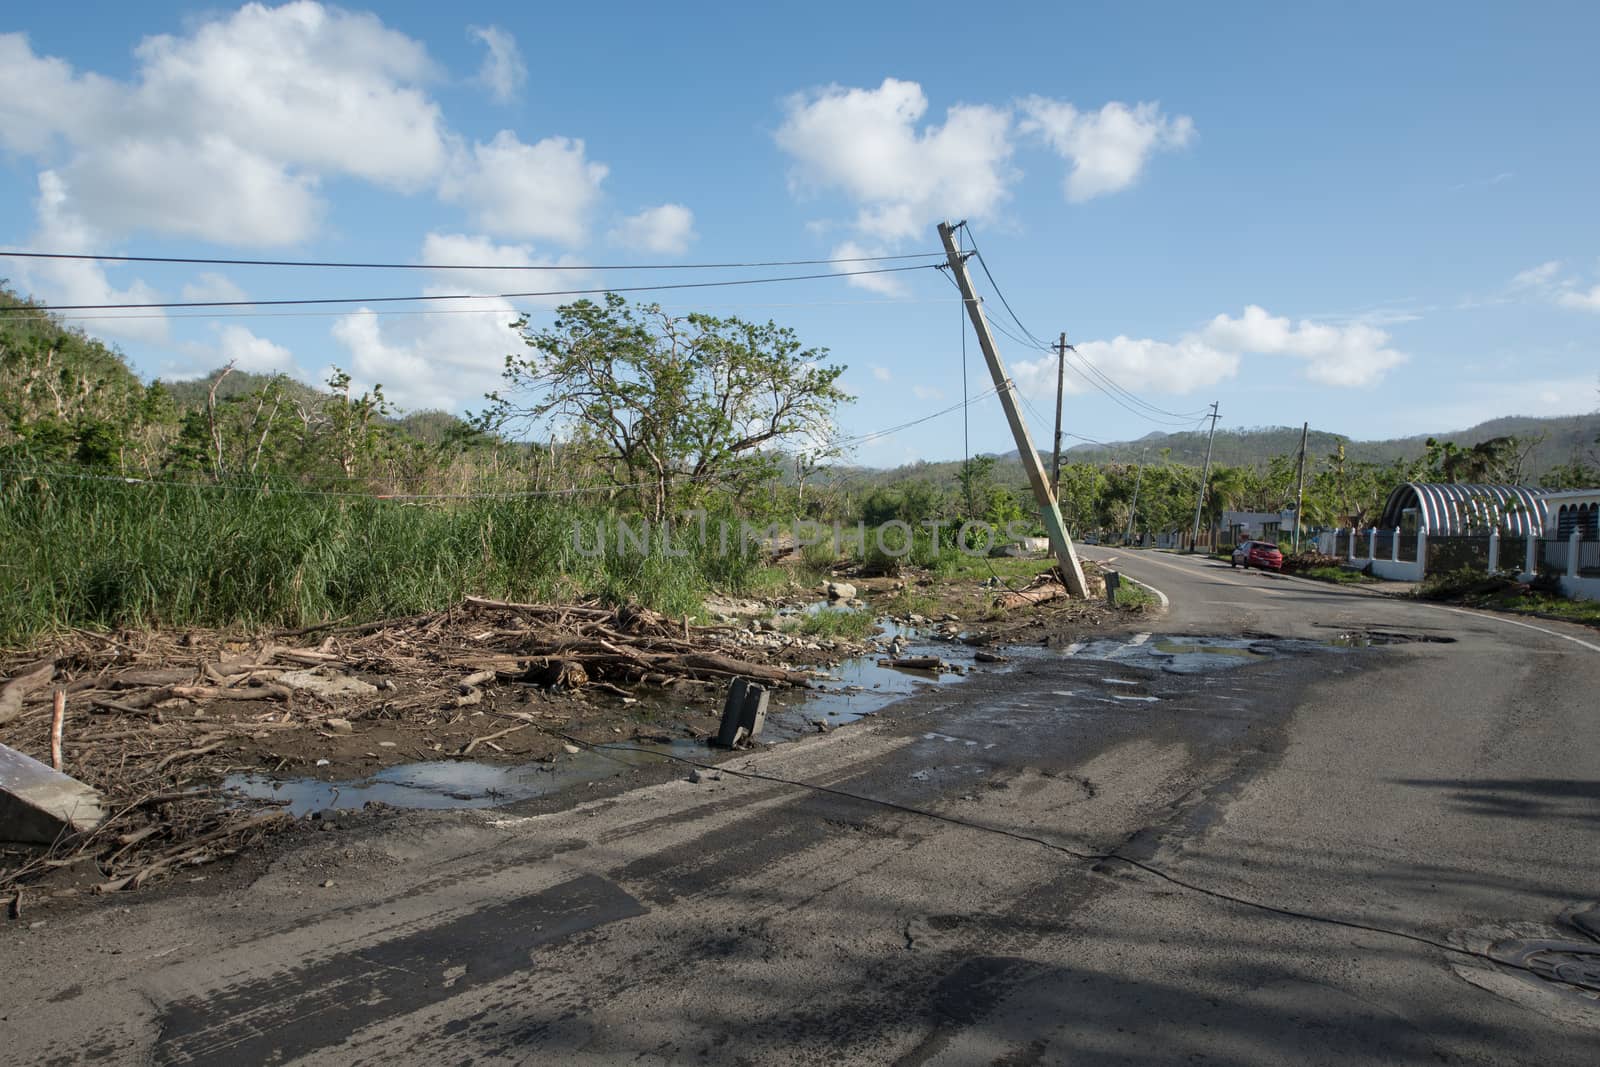 Roadside scene in  Puerto Rico after Hurricane Marie showing damage to power lines